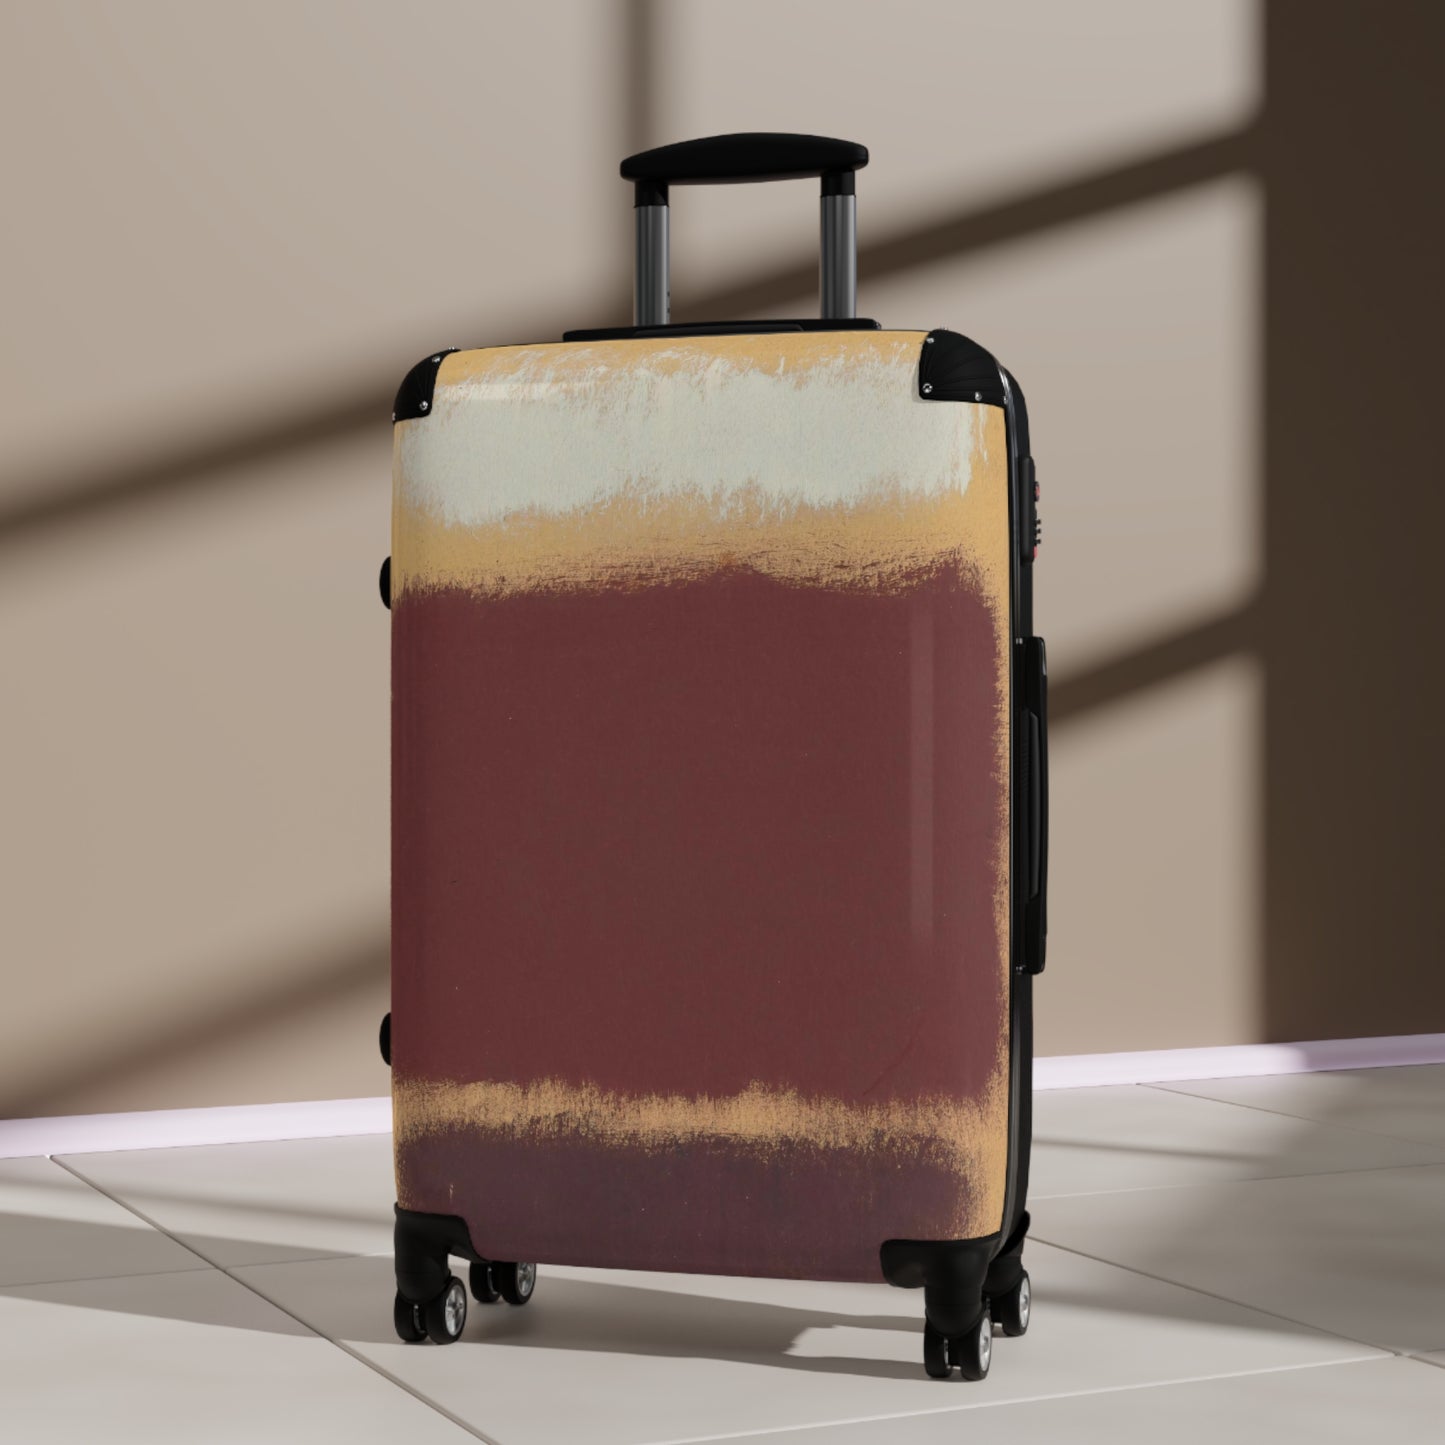 a piece of luggage sitting on top of a tiled floor